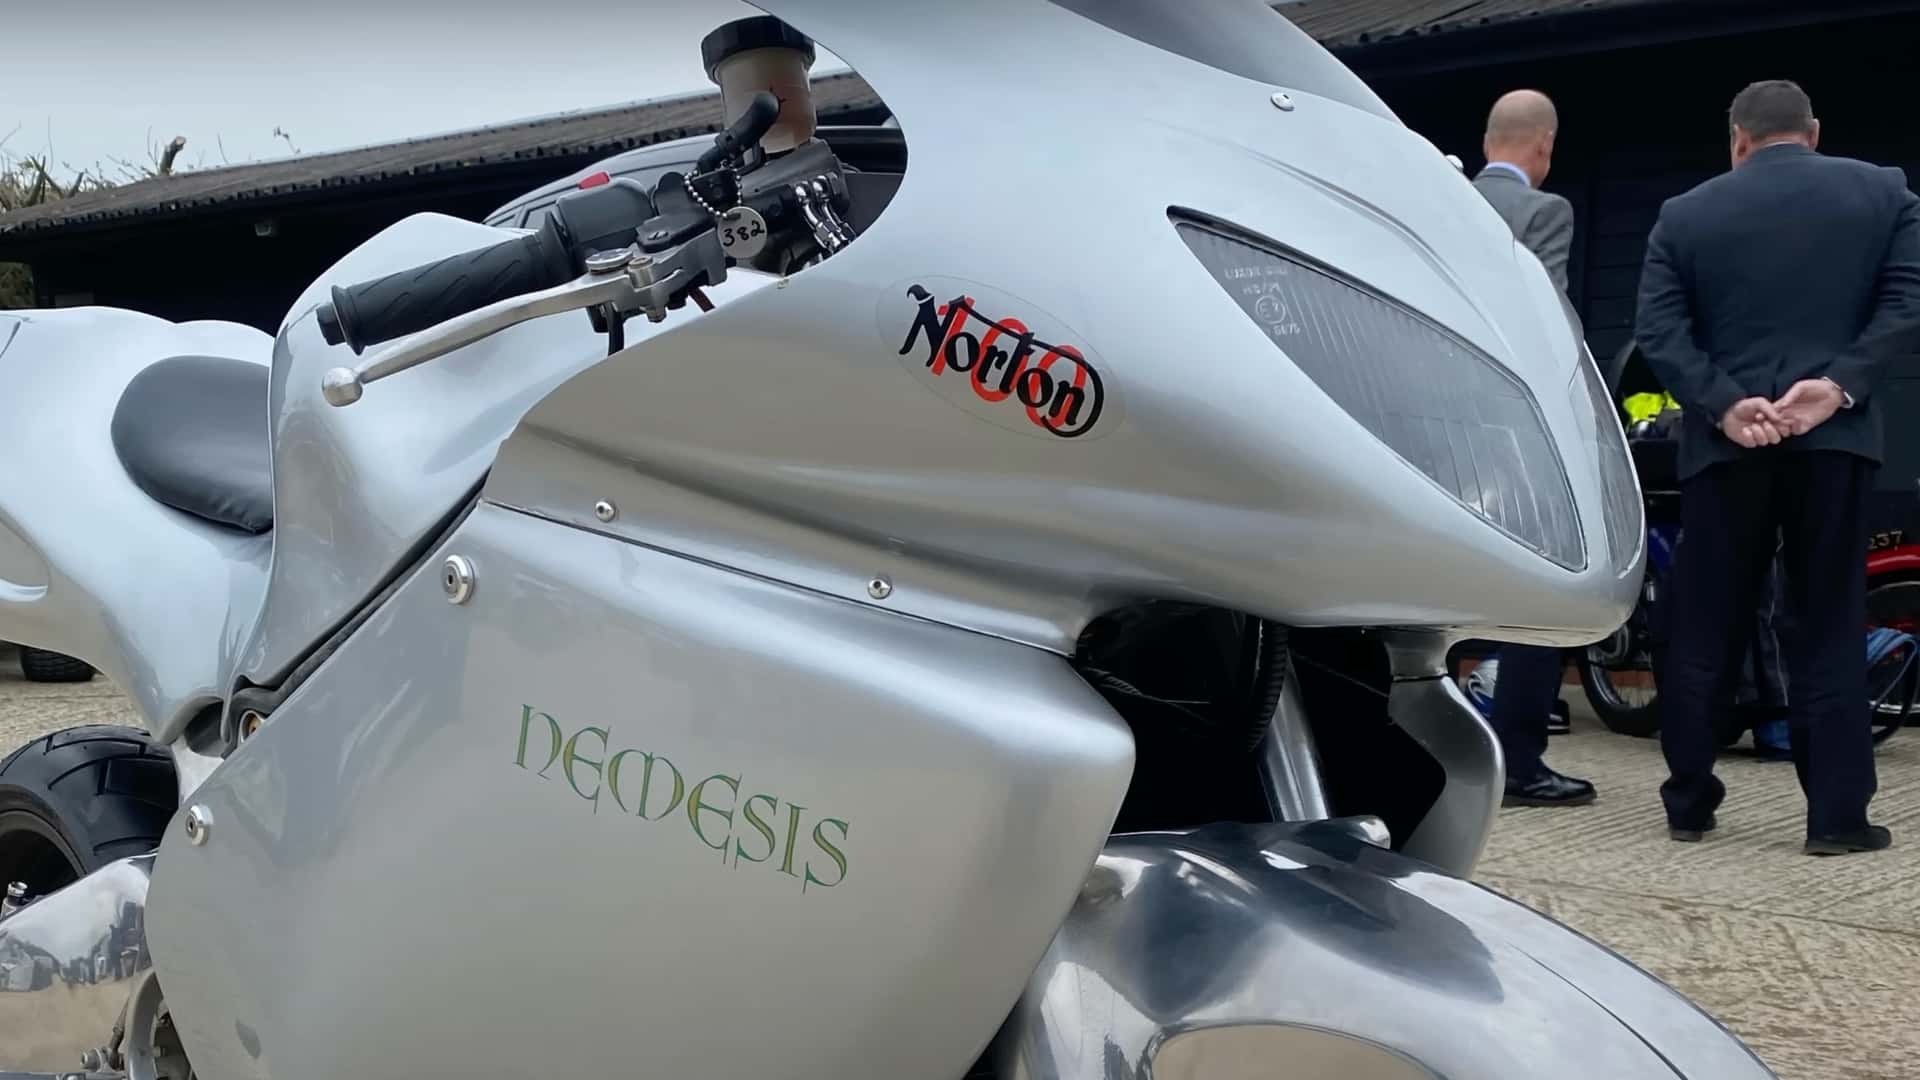 norton’s v8 nemesis motorcycle was crazy and it’s finally getting restored